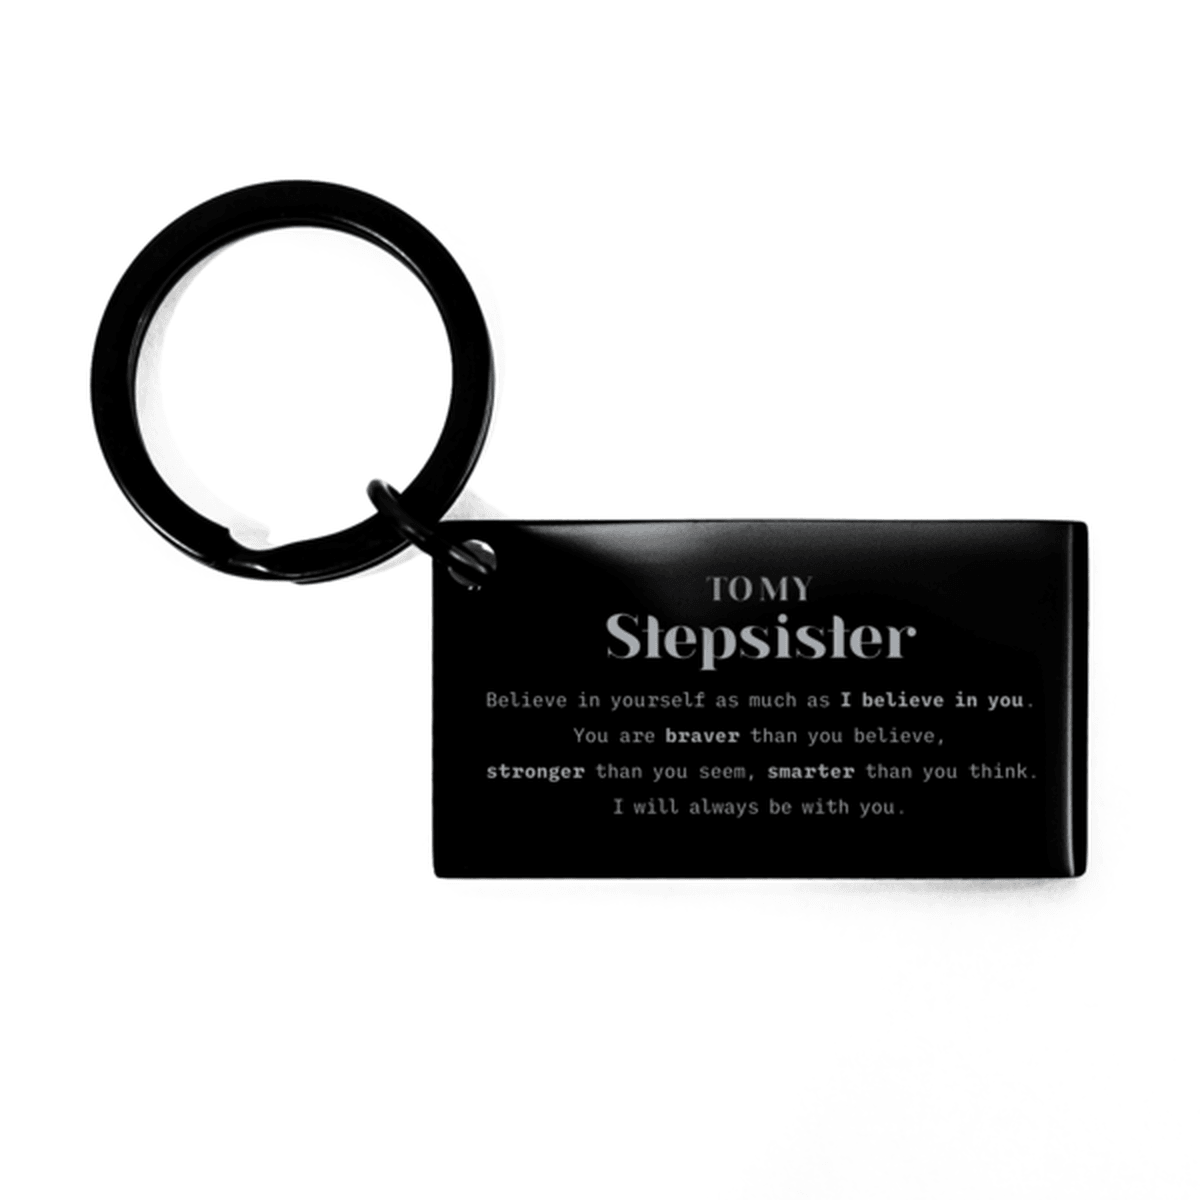 Stepsister Keychain Gifts, To My Stepsister You are braver than you believe, stronger than you seem, Inspirational Gifts For Stepsister Engraved, Birthday, Christmas Gifts For Stepsister Men Women